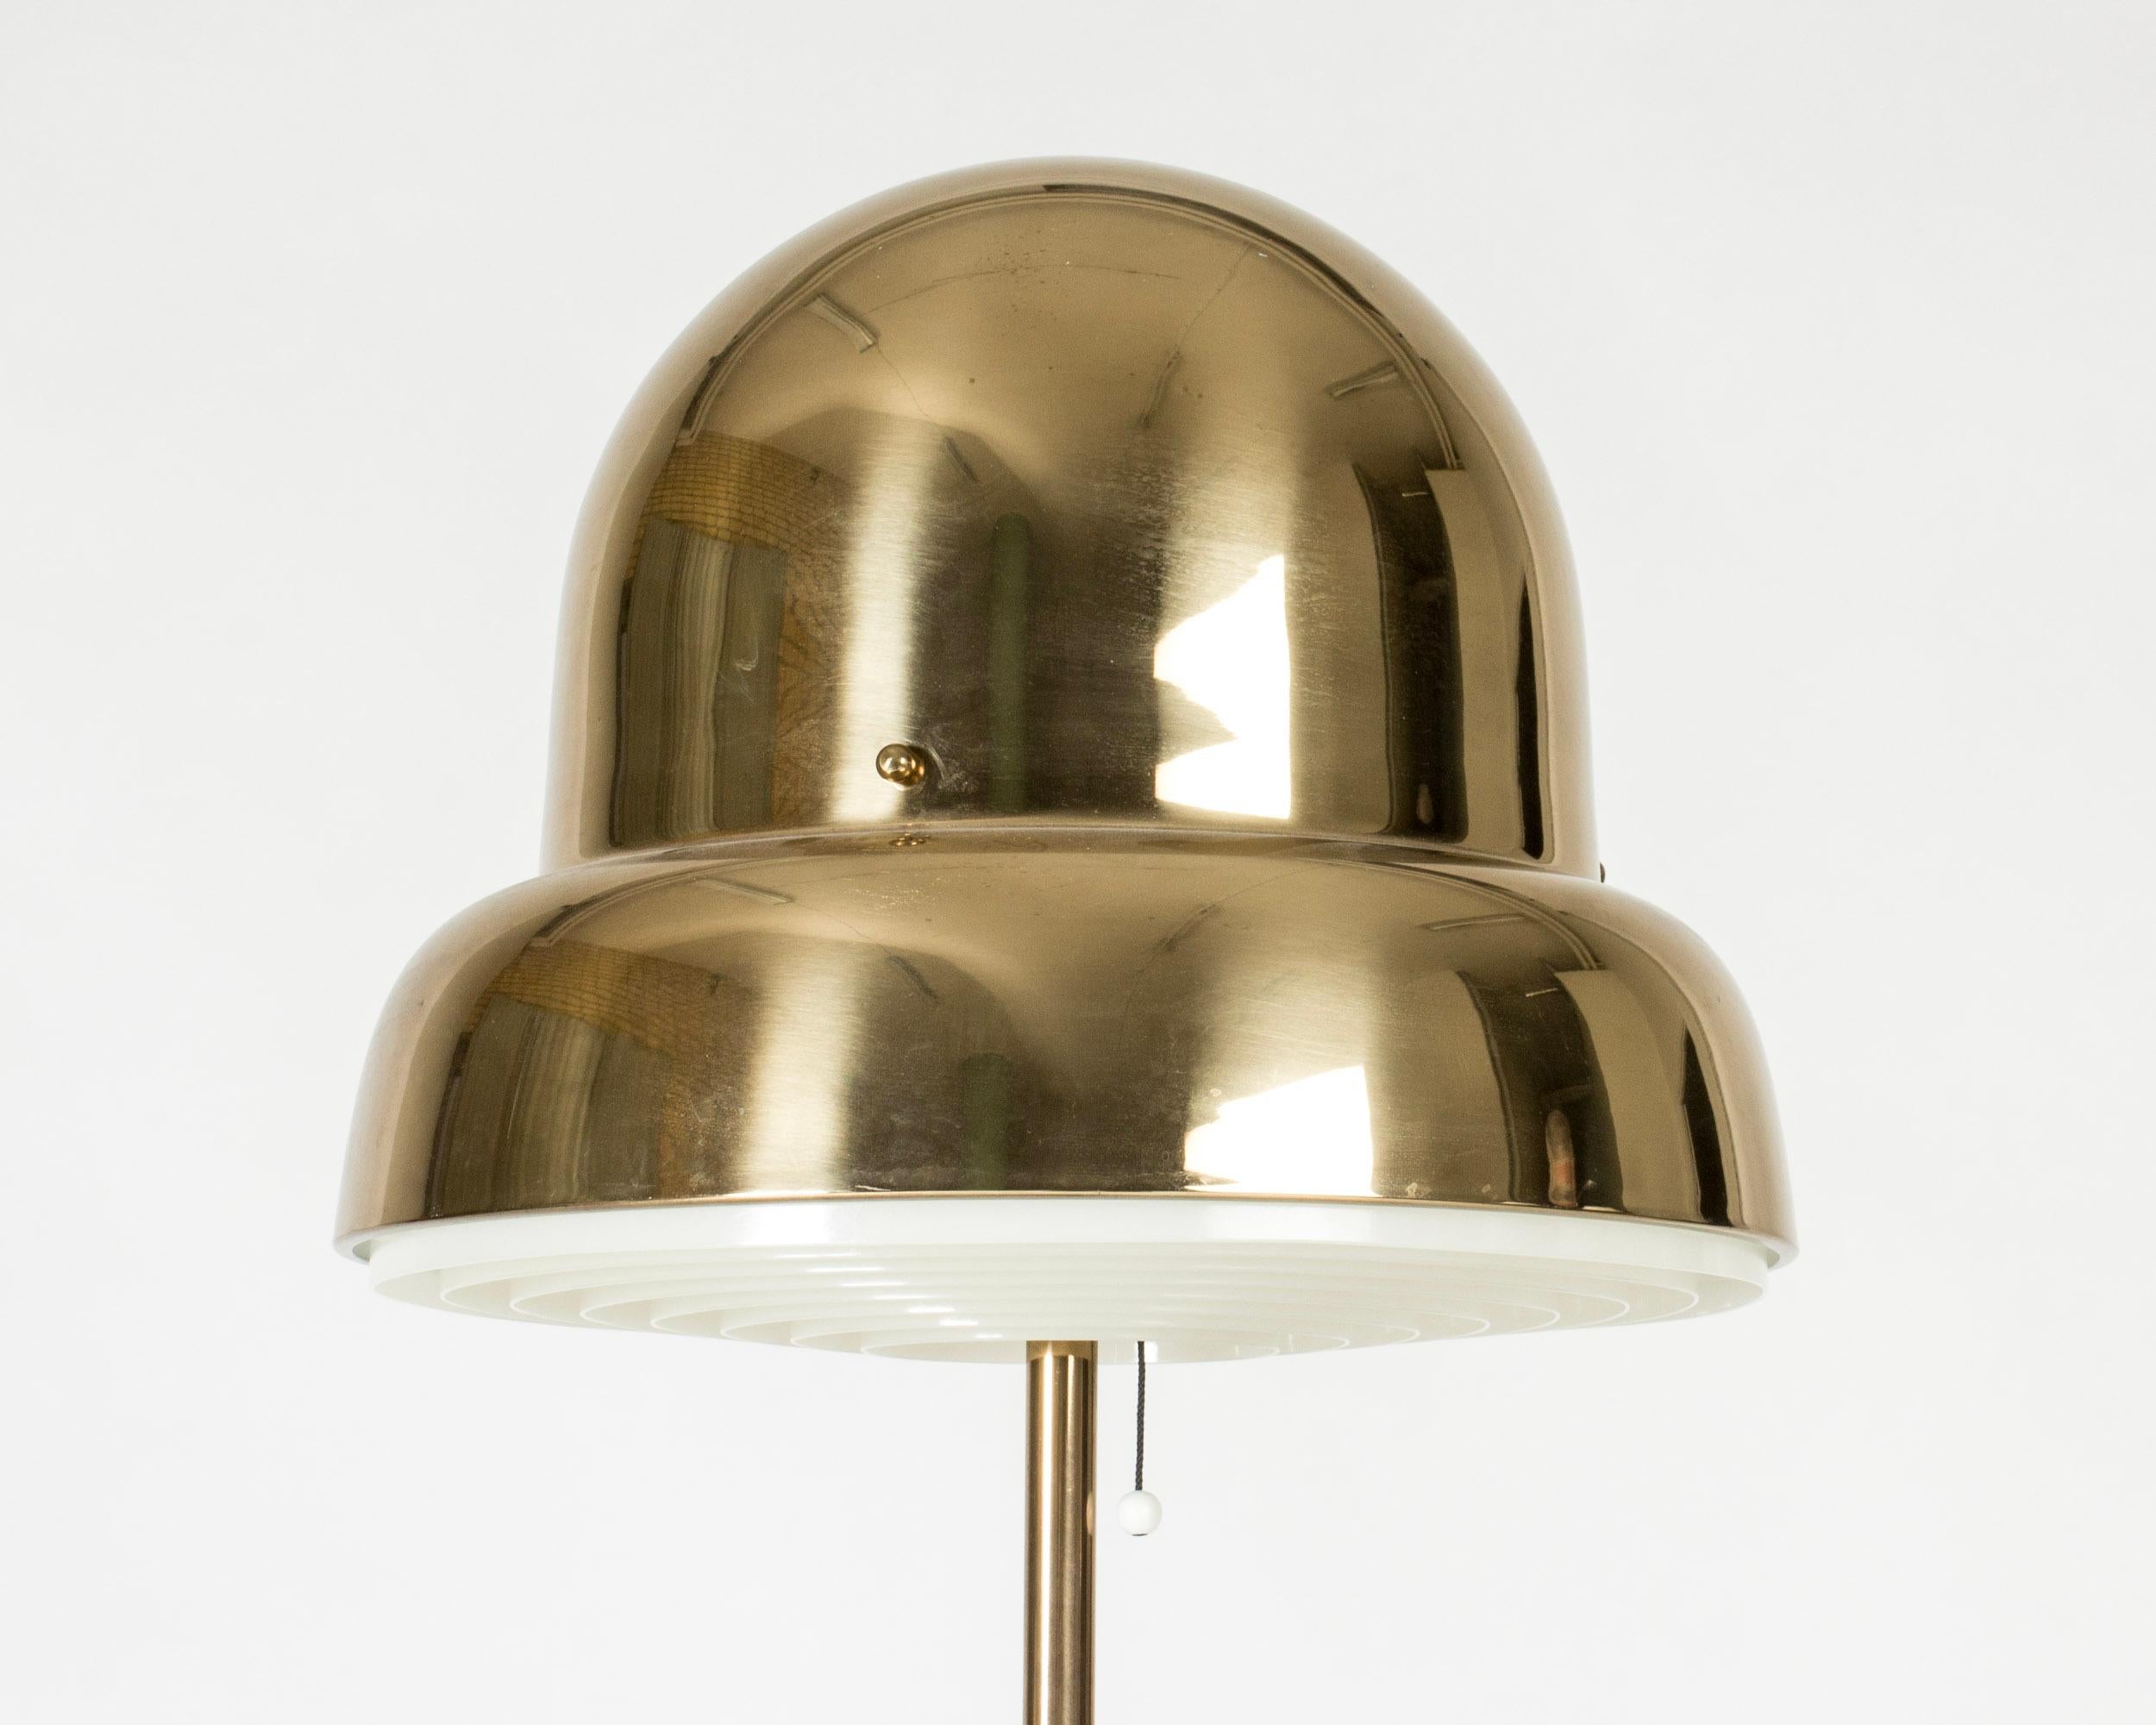 Cool brass floor lamp from Bergboms, with an oversized lampshade in a rounded, organic form. Lamellas shield the light on the underside.